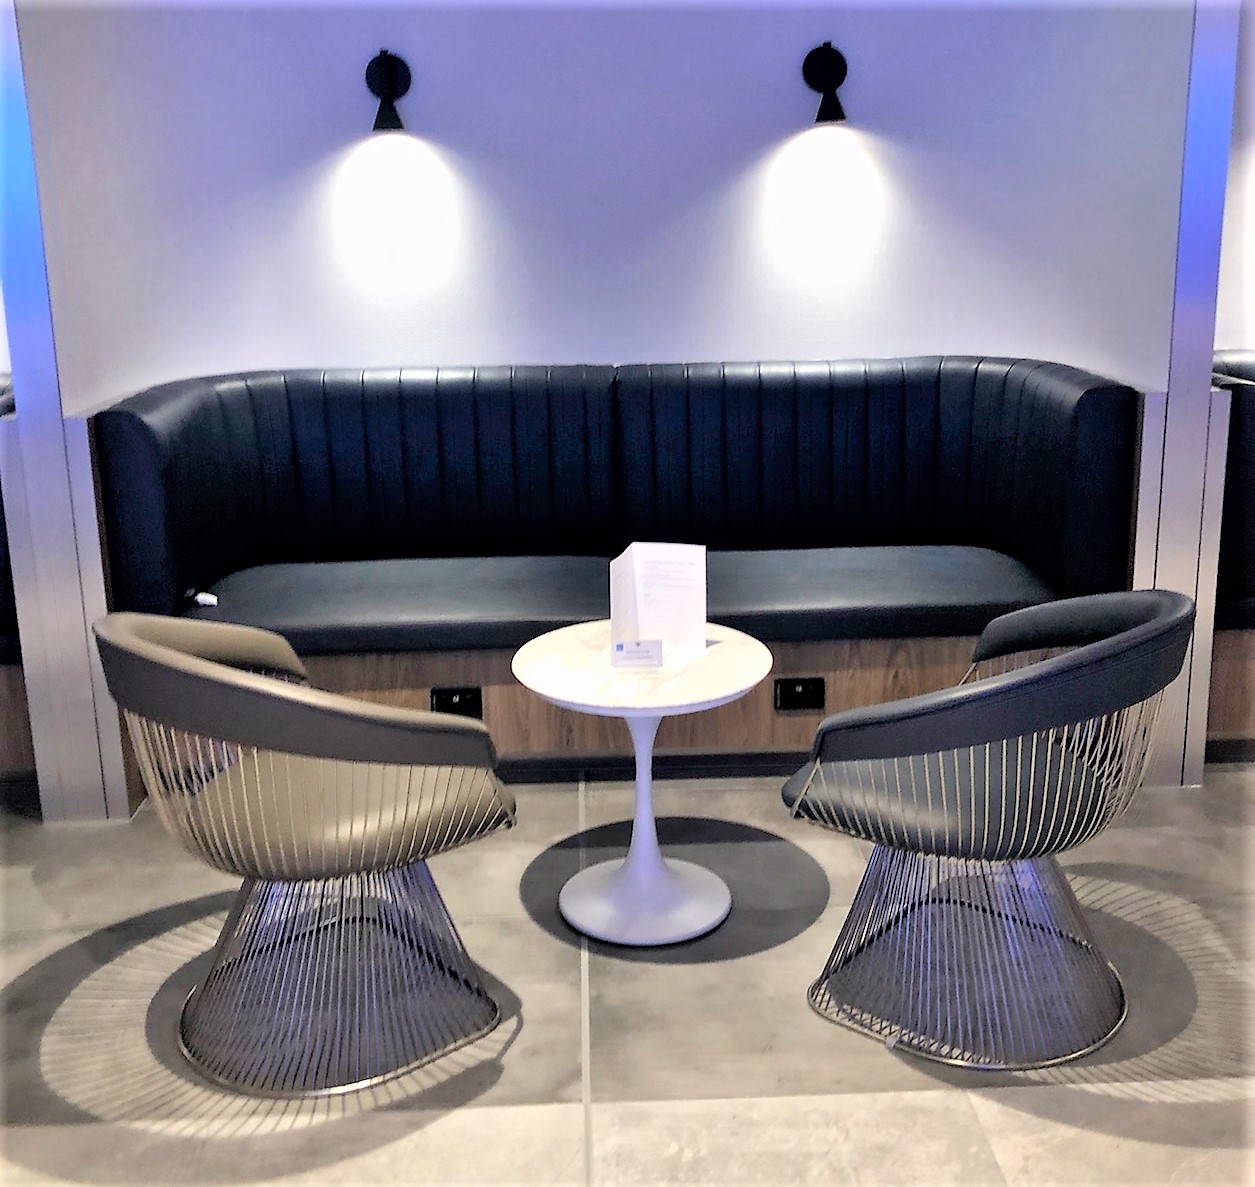 American Express Lounge, Sydney Airport: Long-table seating